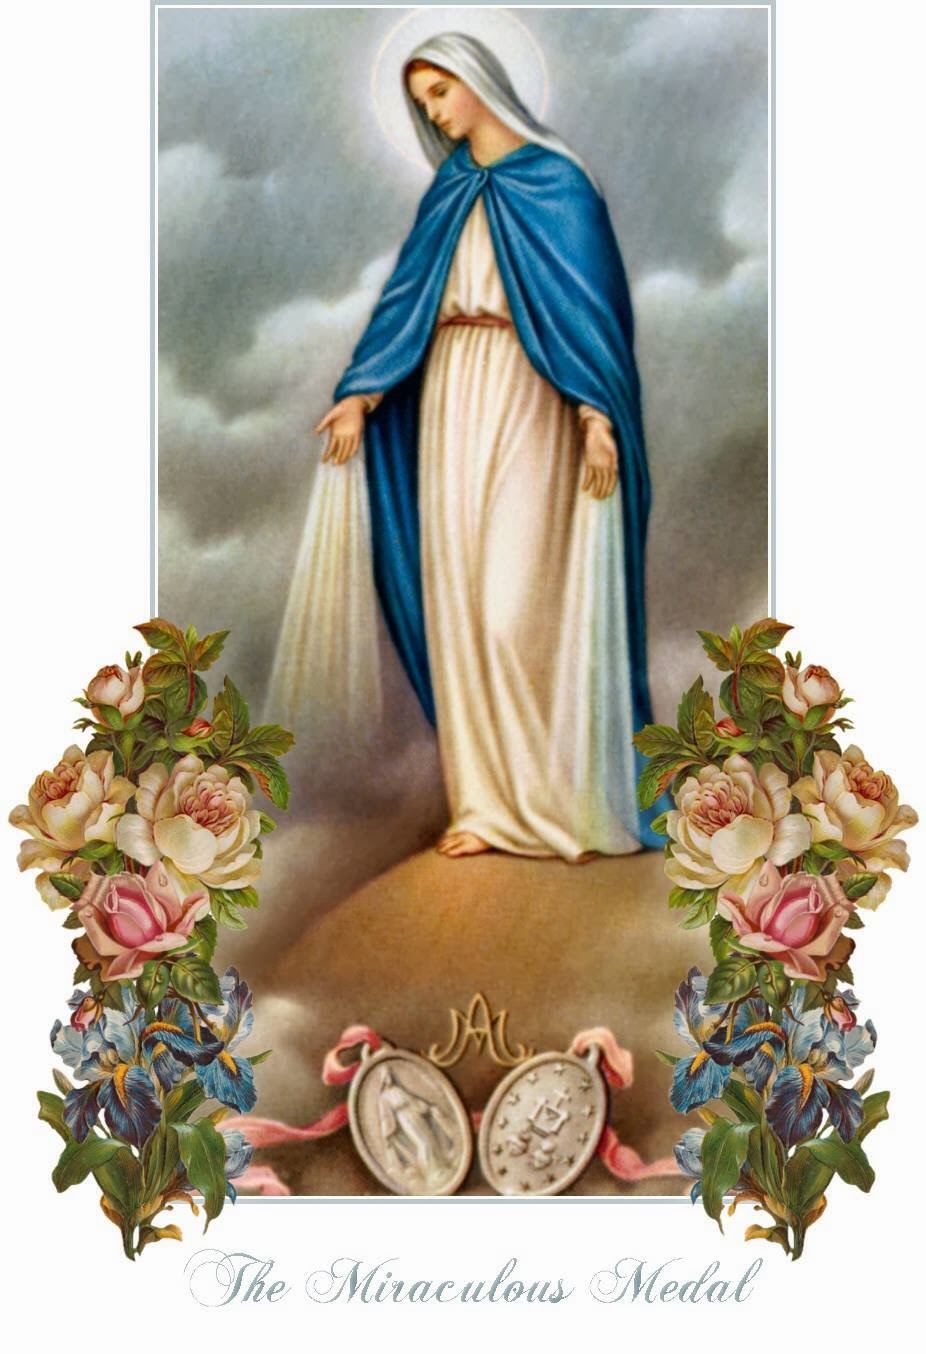 Faith In A Bottle  A Virgin A Day  Our Lady Of The Miraculous Medal